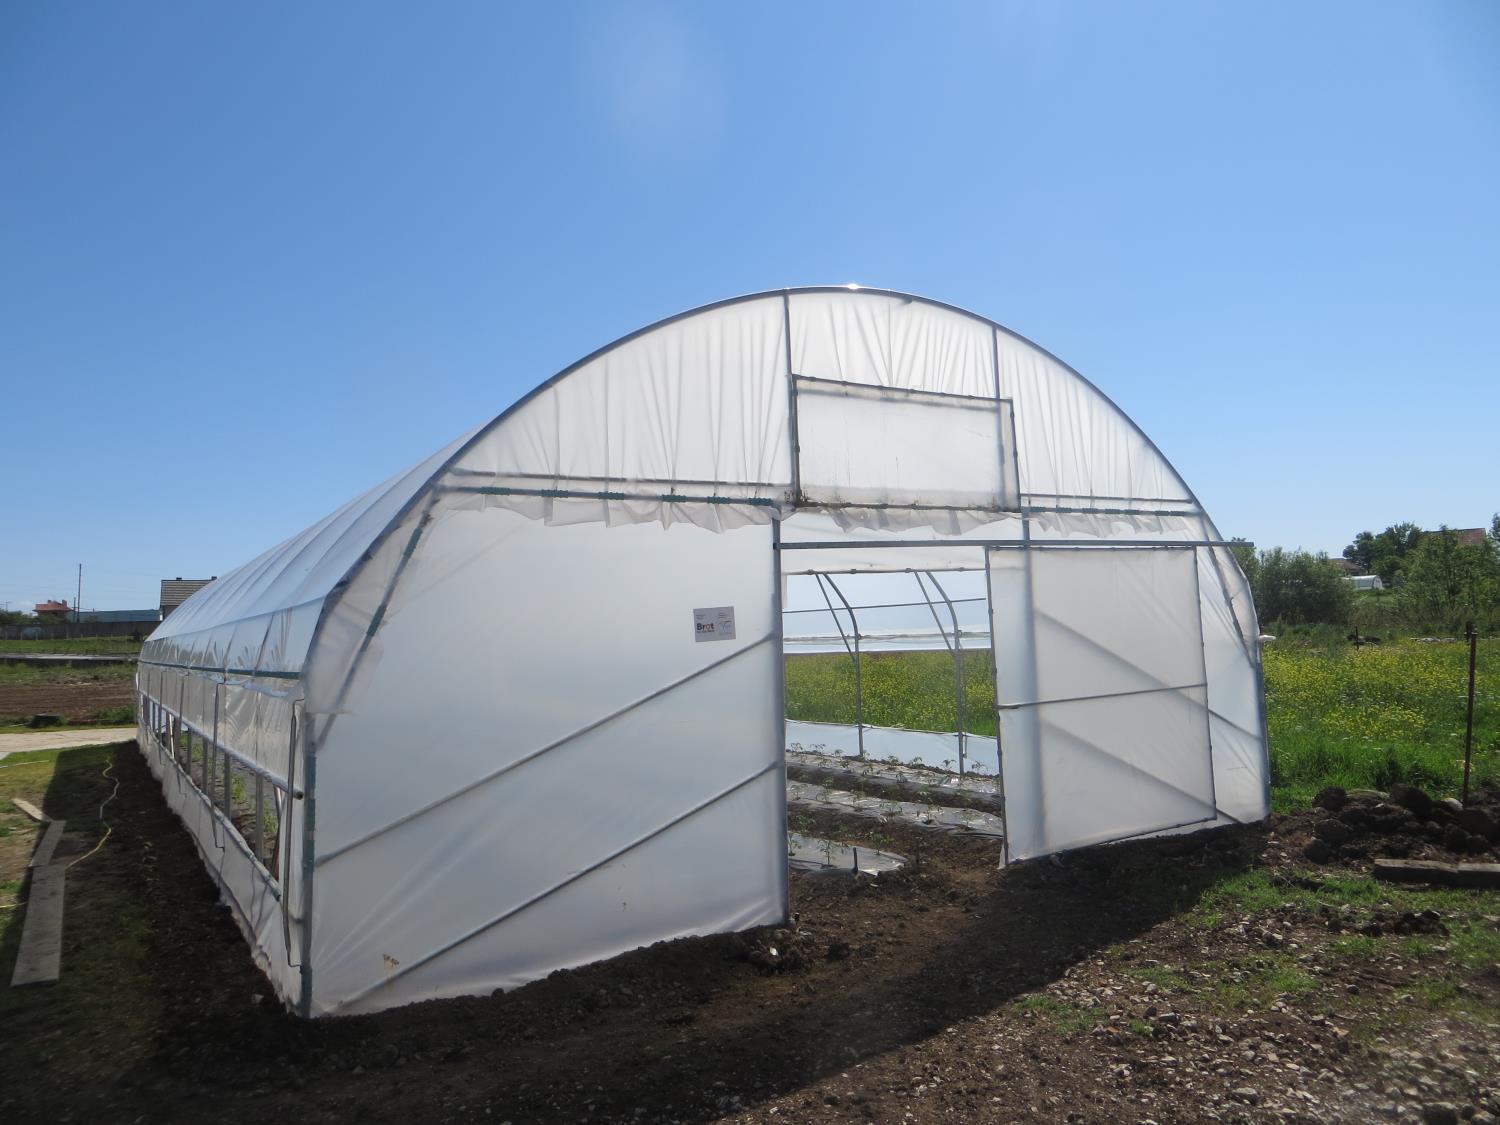 IADK finalizes the supplying of greenhouses for 17 beneficiaries